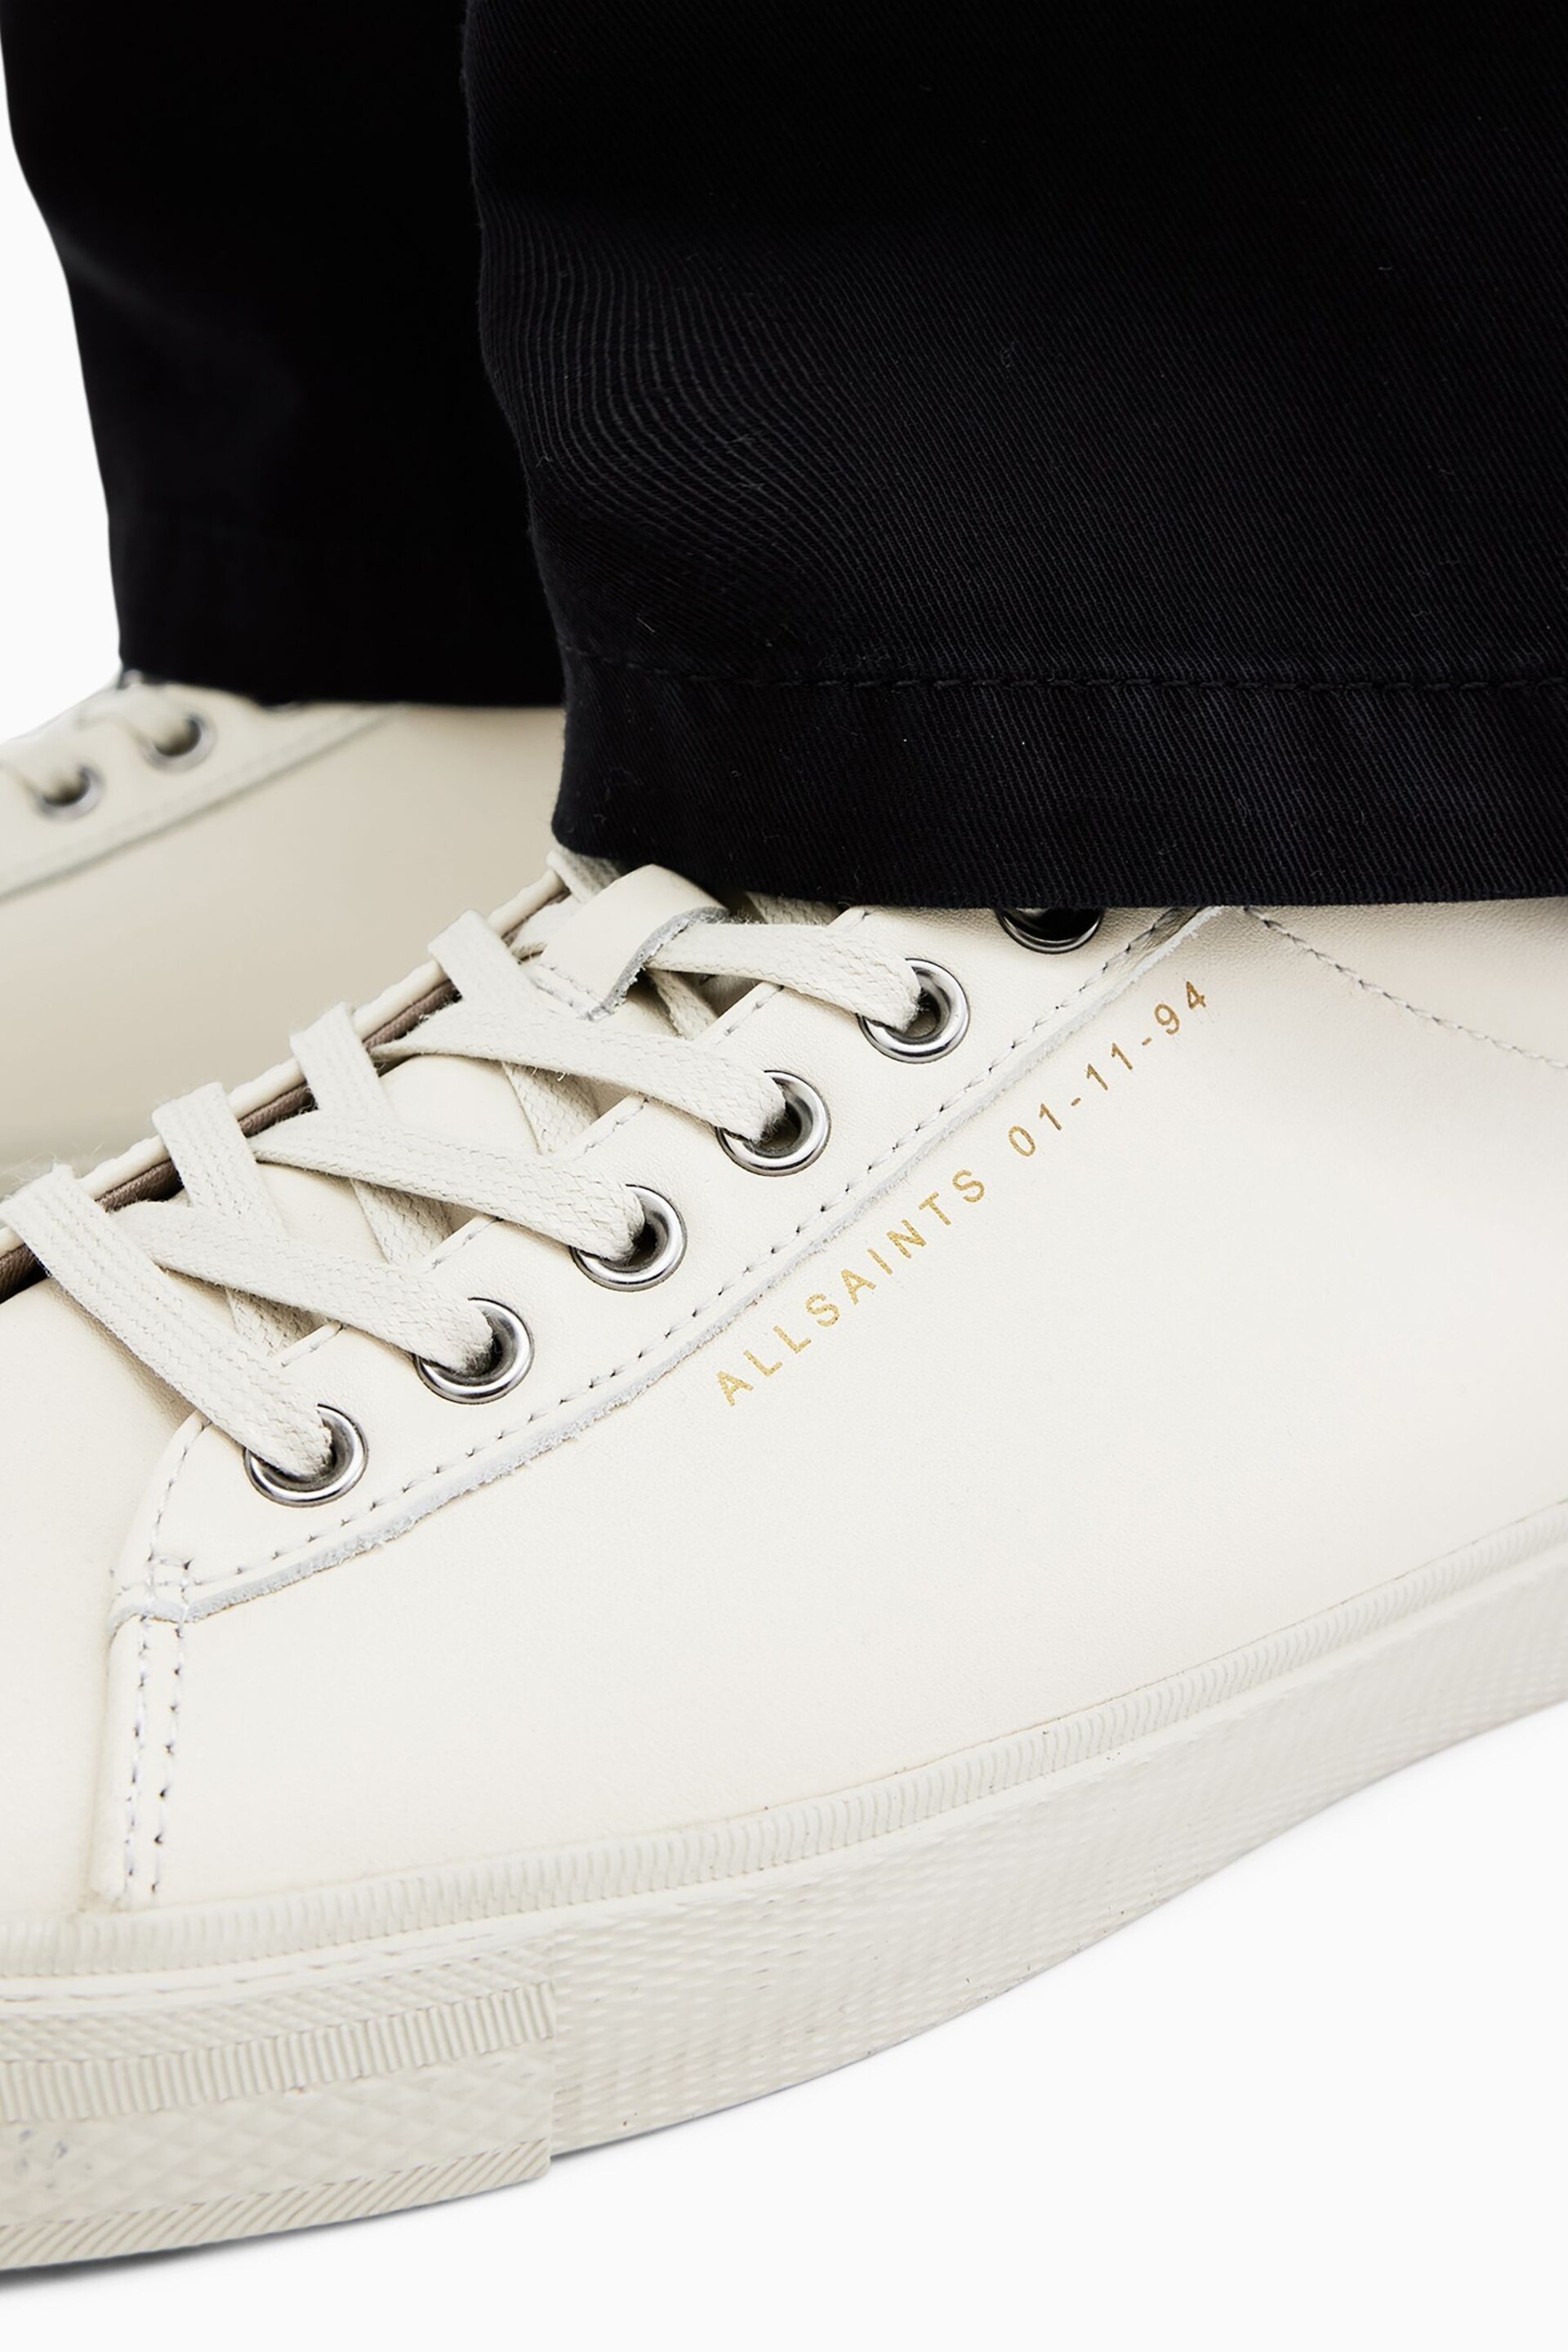 AllSaints White Brody Leather Low Top Trainers - Image 7 of 7